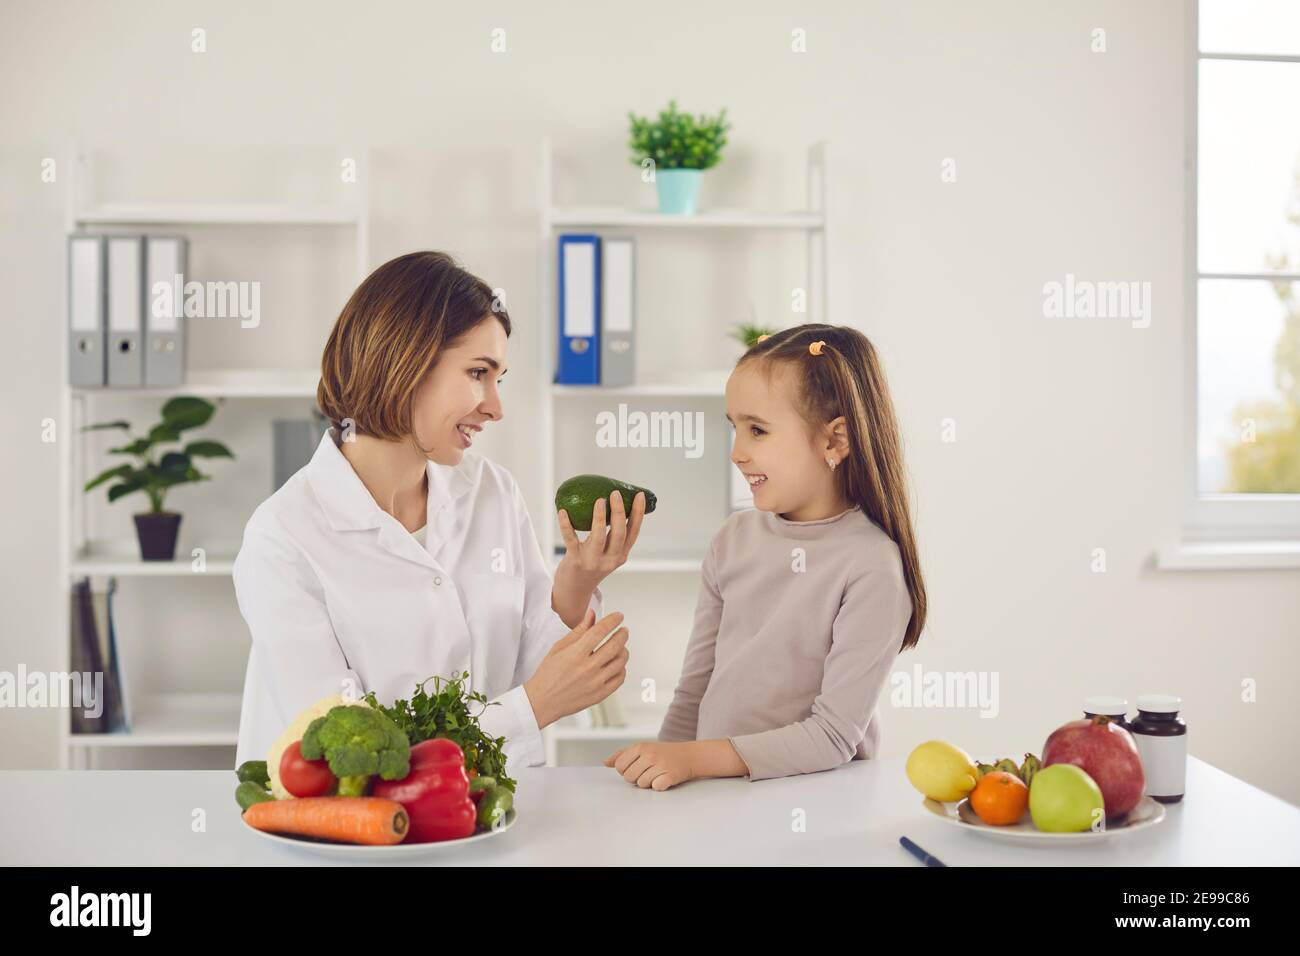 Nutritionist tells a little girl about the benefits of avocados while sitting at a table in office. Stock Photo